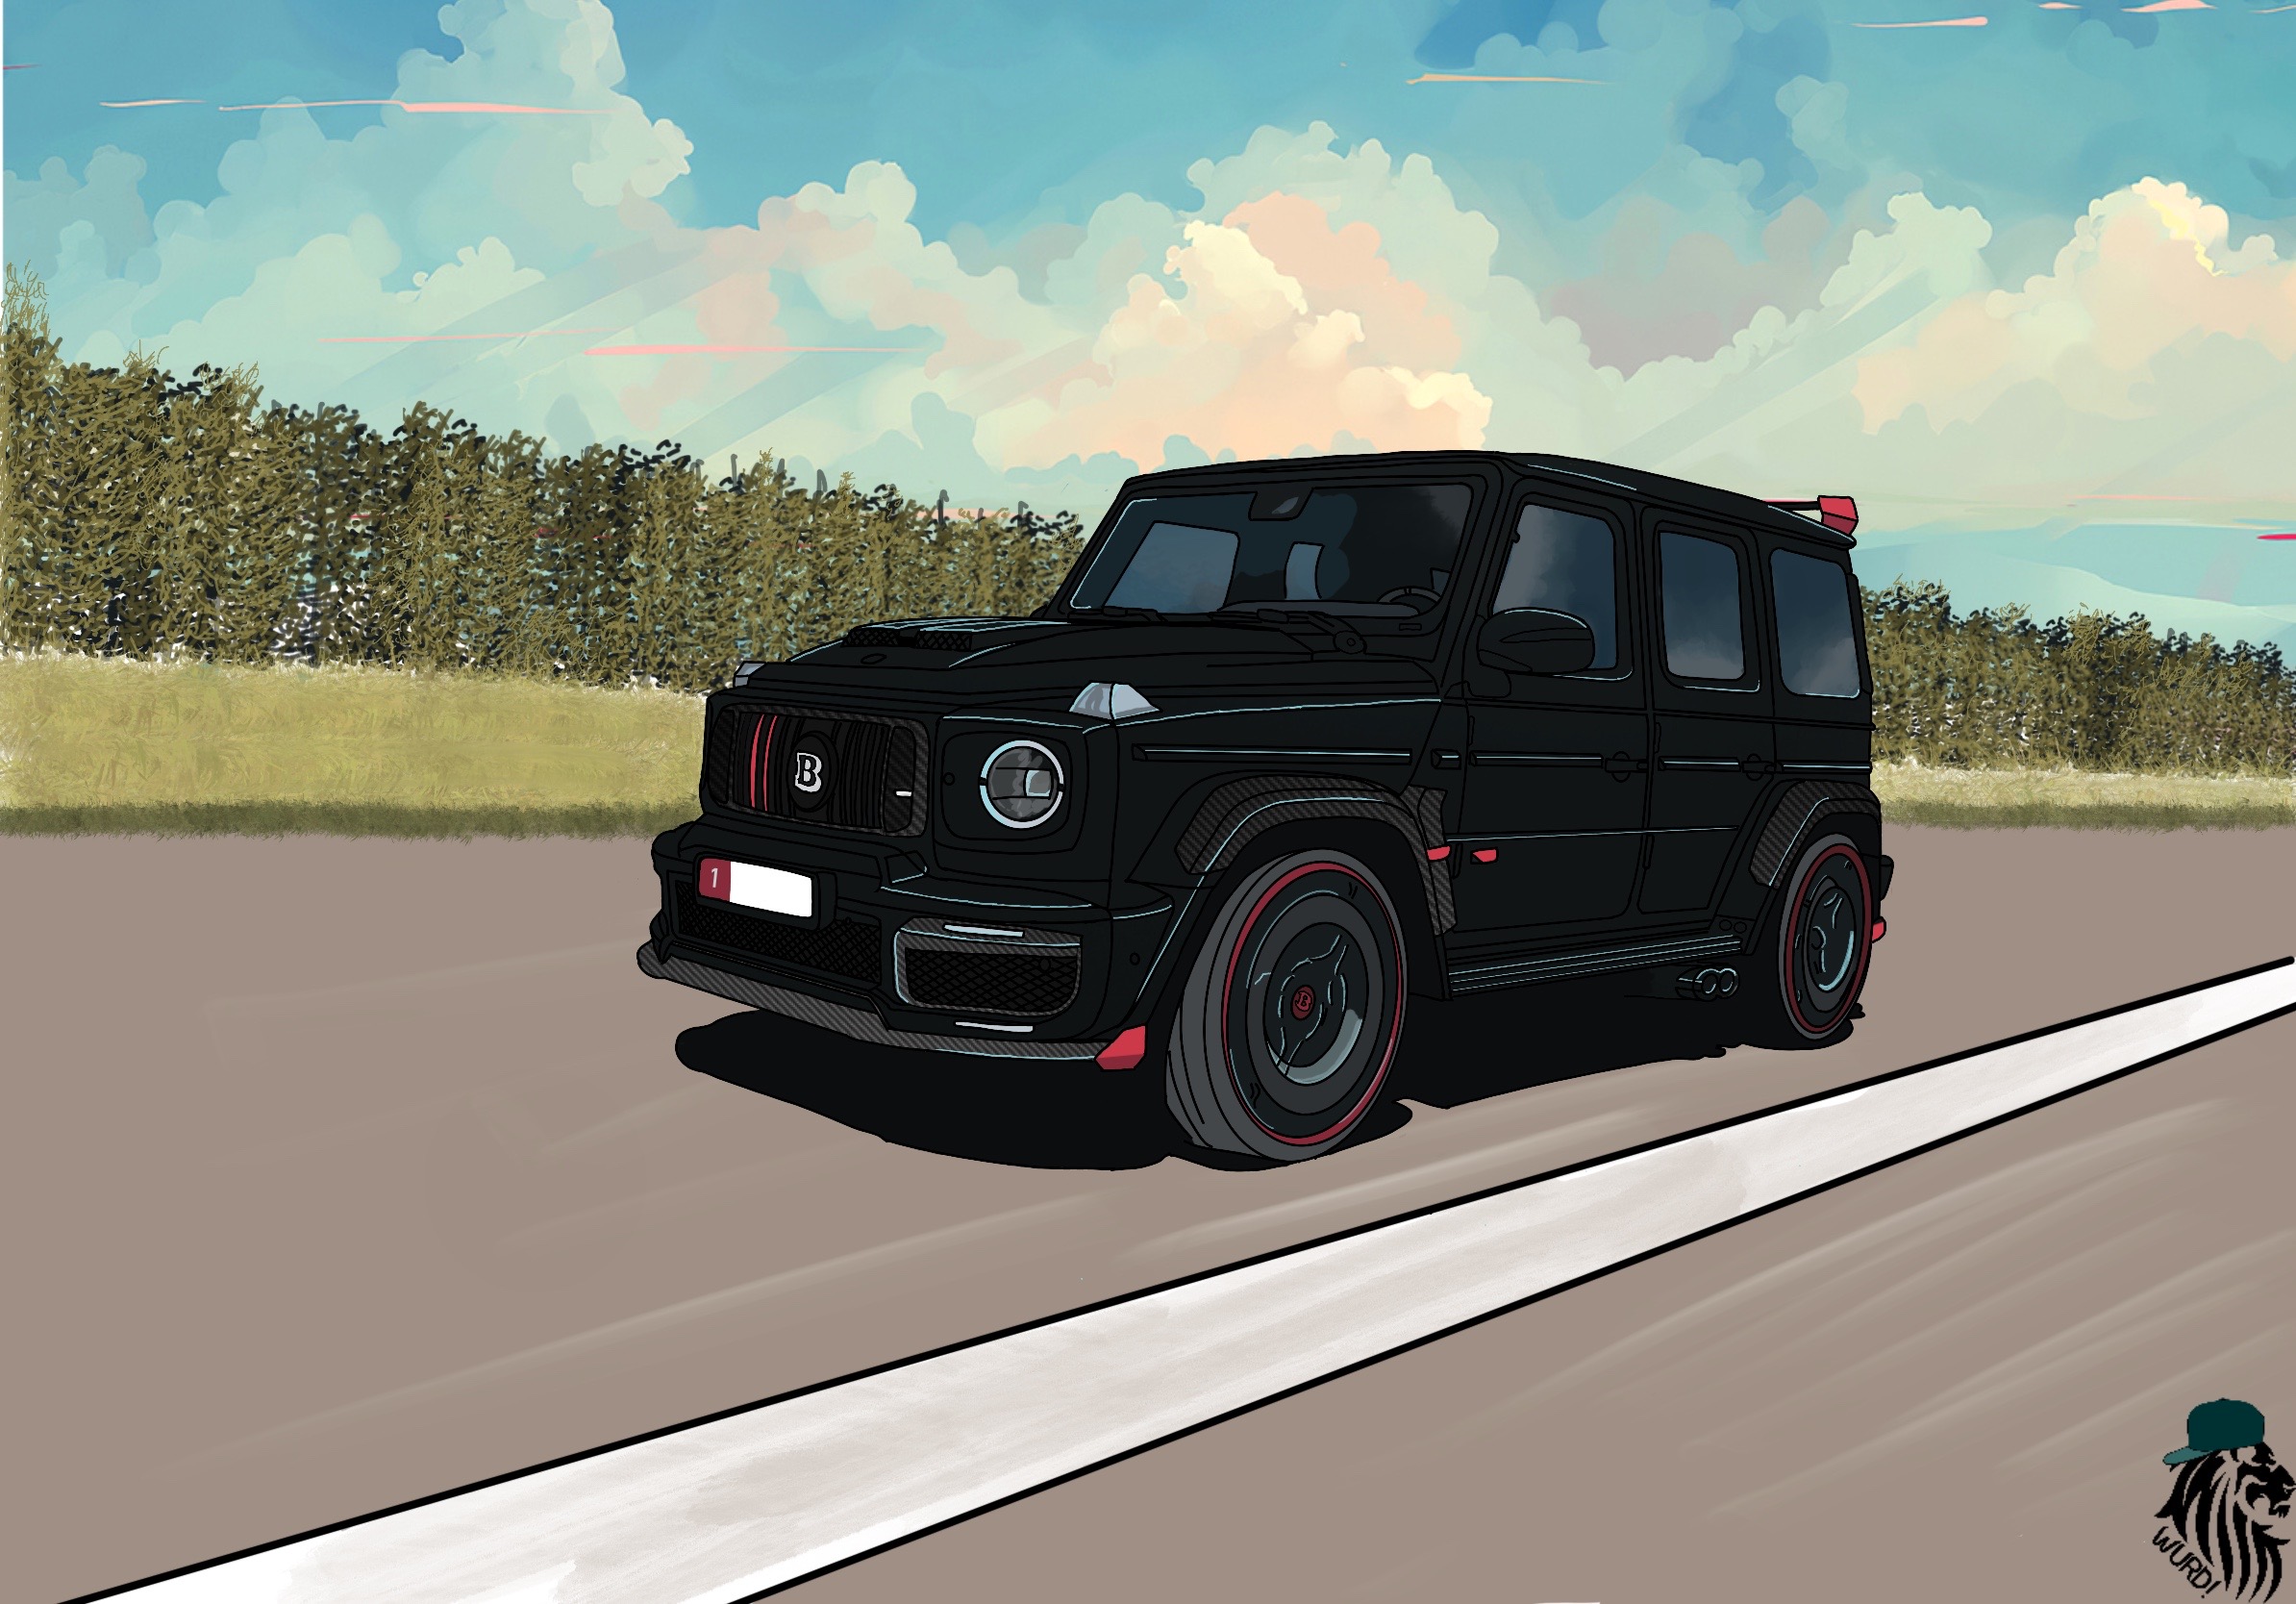 The G63